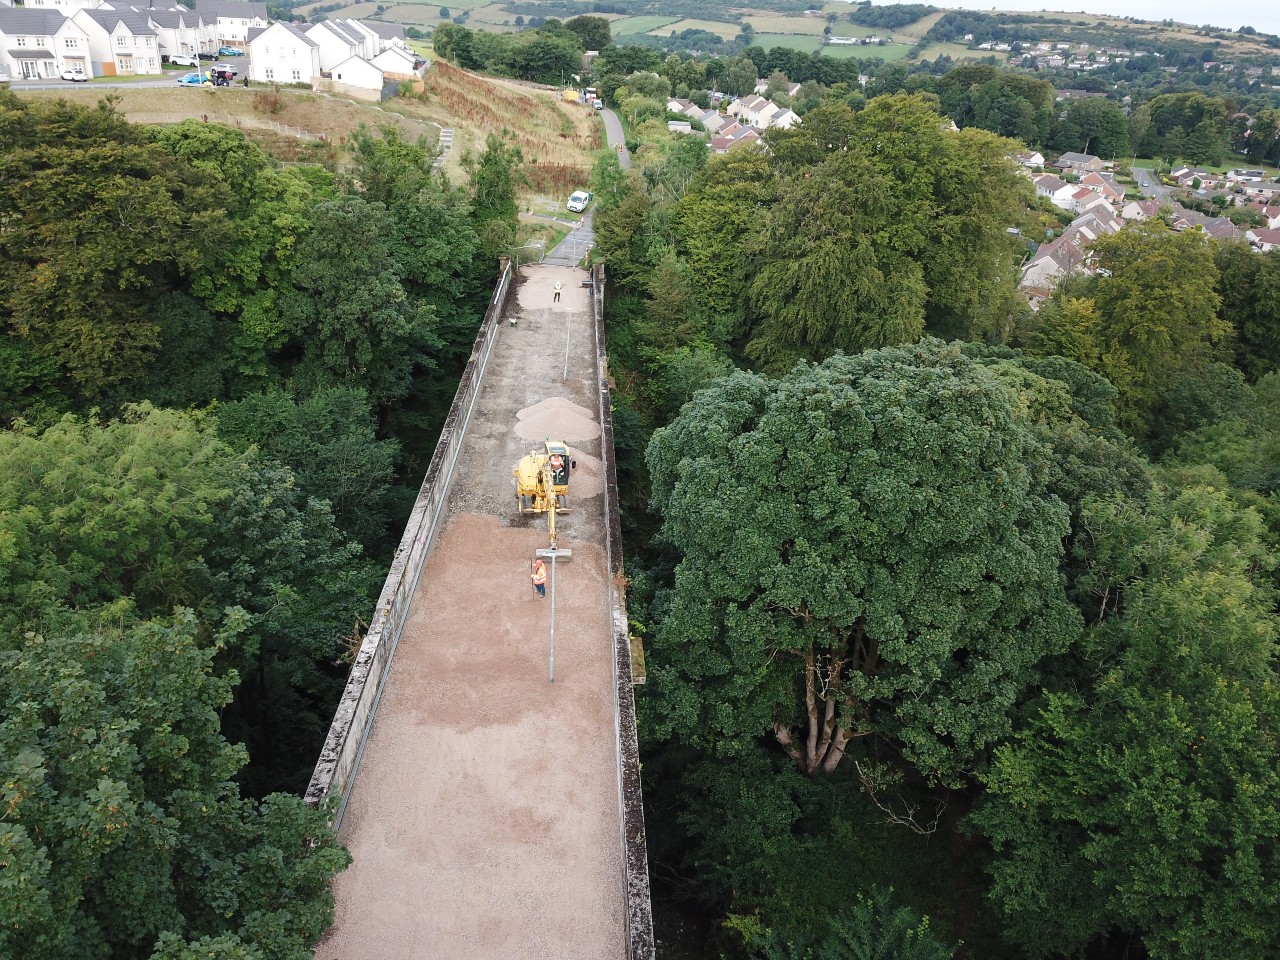 Phase one of works under way in September 2021